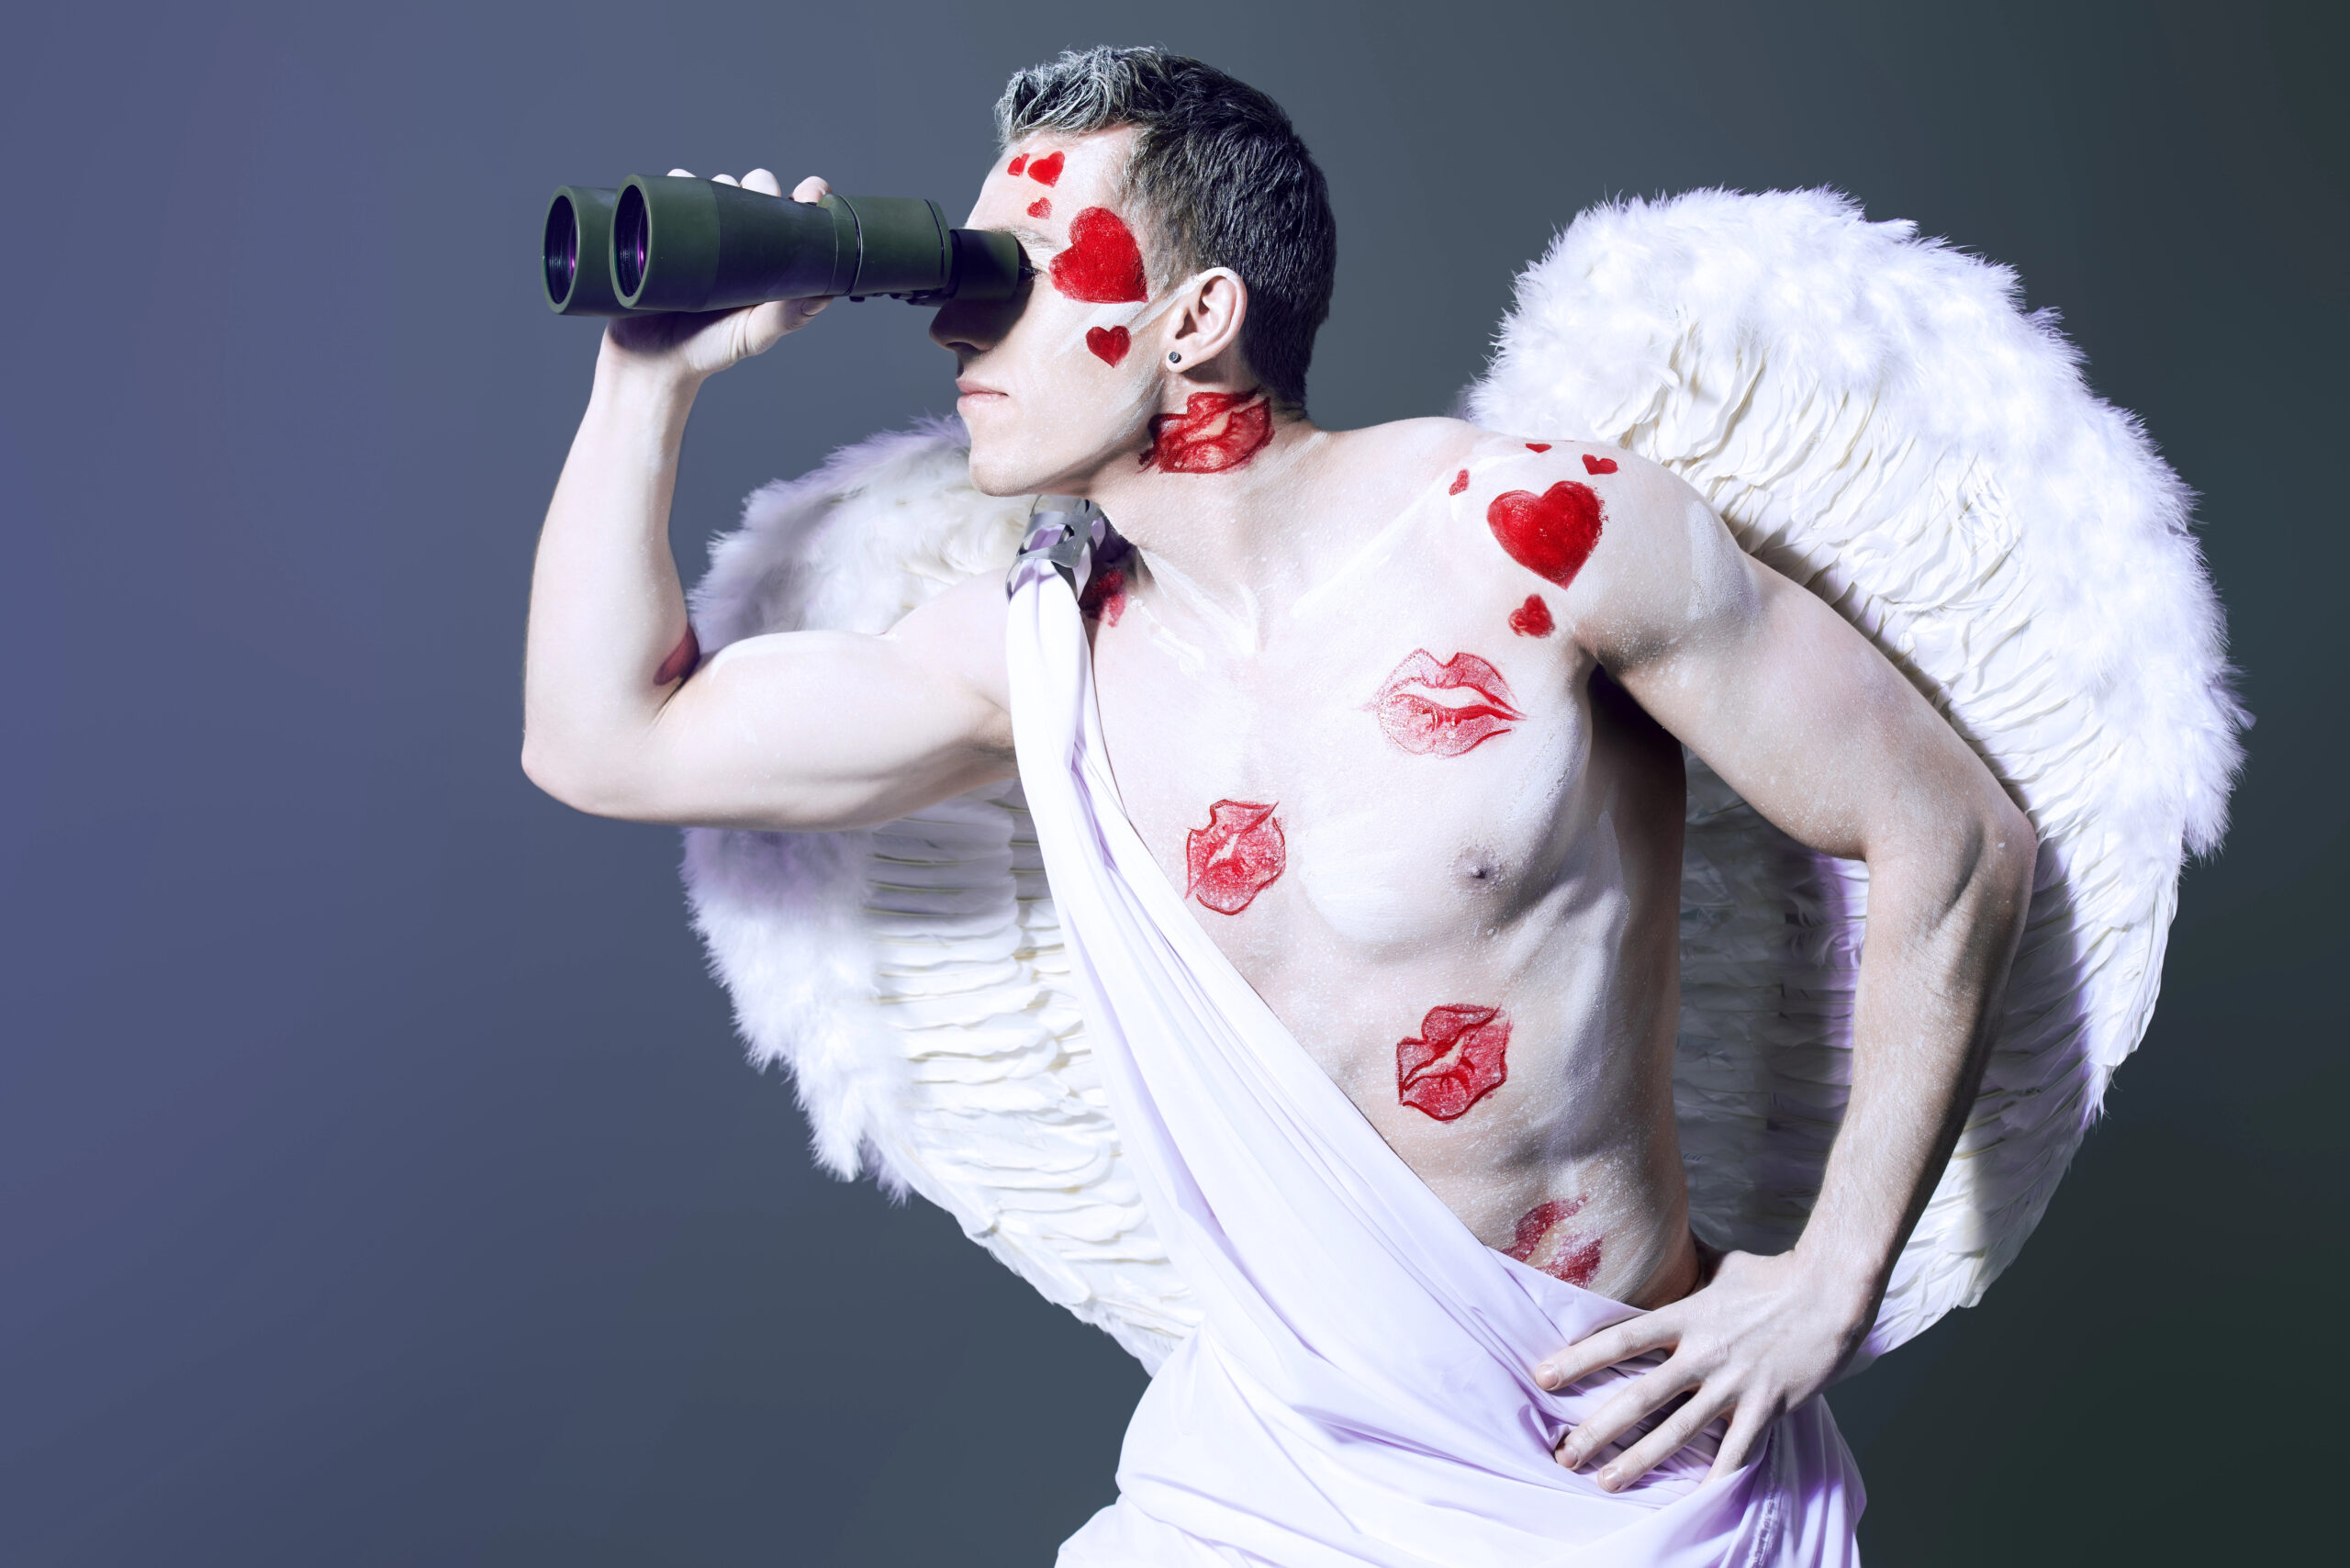 A person dressed as an angel, with white wings and wearing a draped white cloth, looks through binoculars, embodying a whimsical search intent. Their body is painted with hearts and lip prints. The background is a gradient of dark shades.